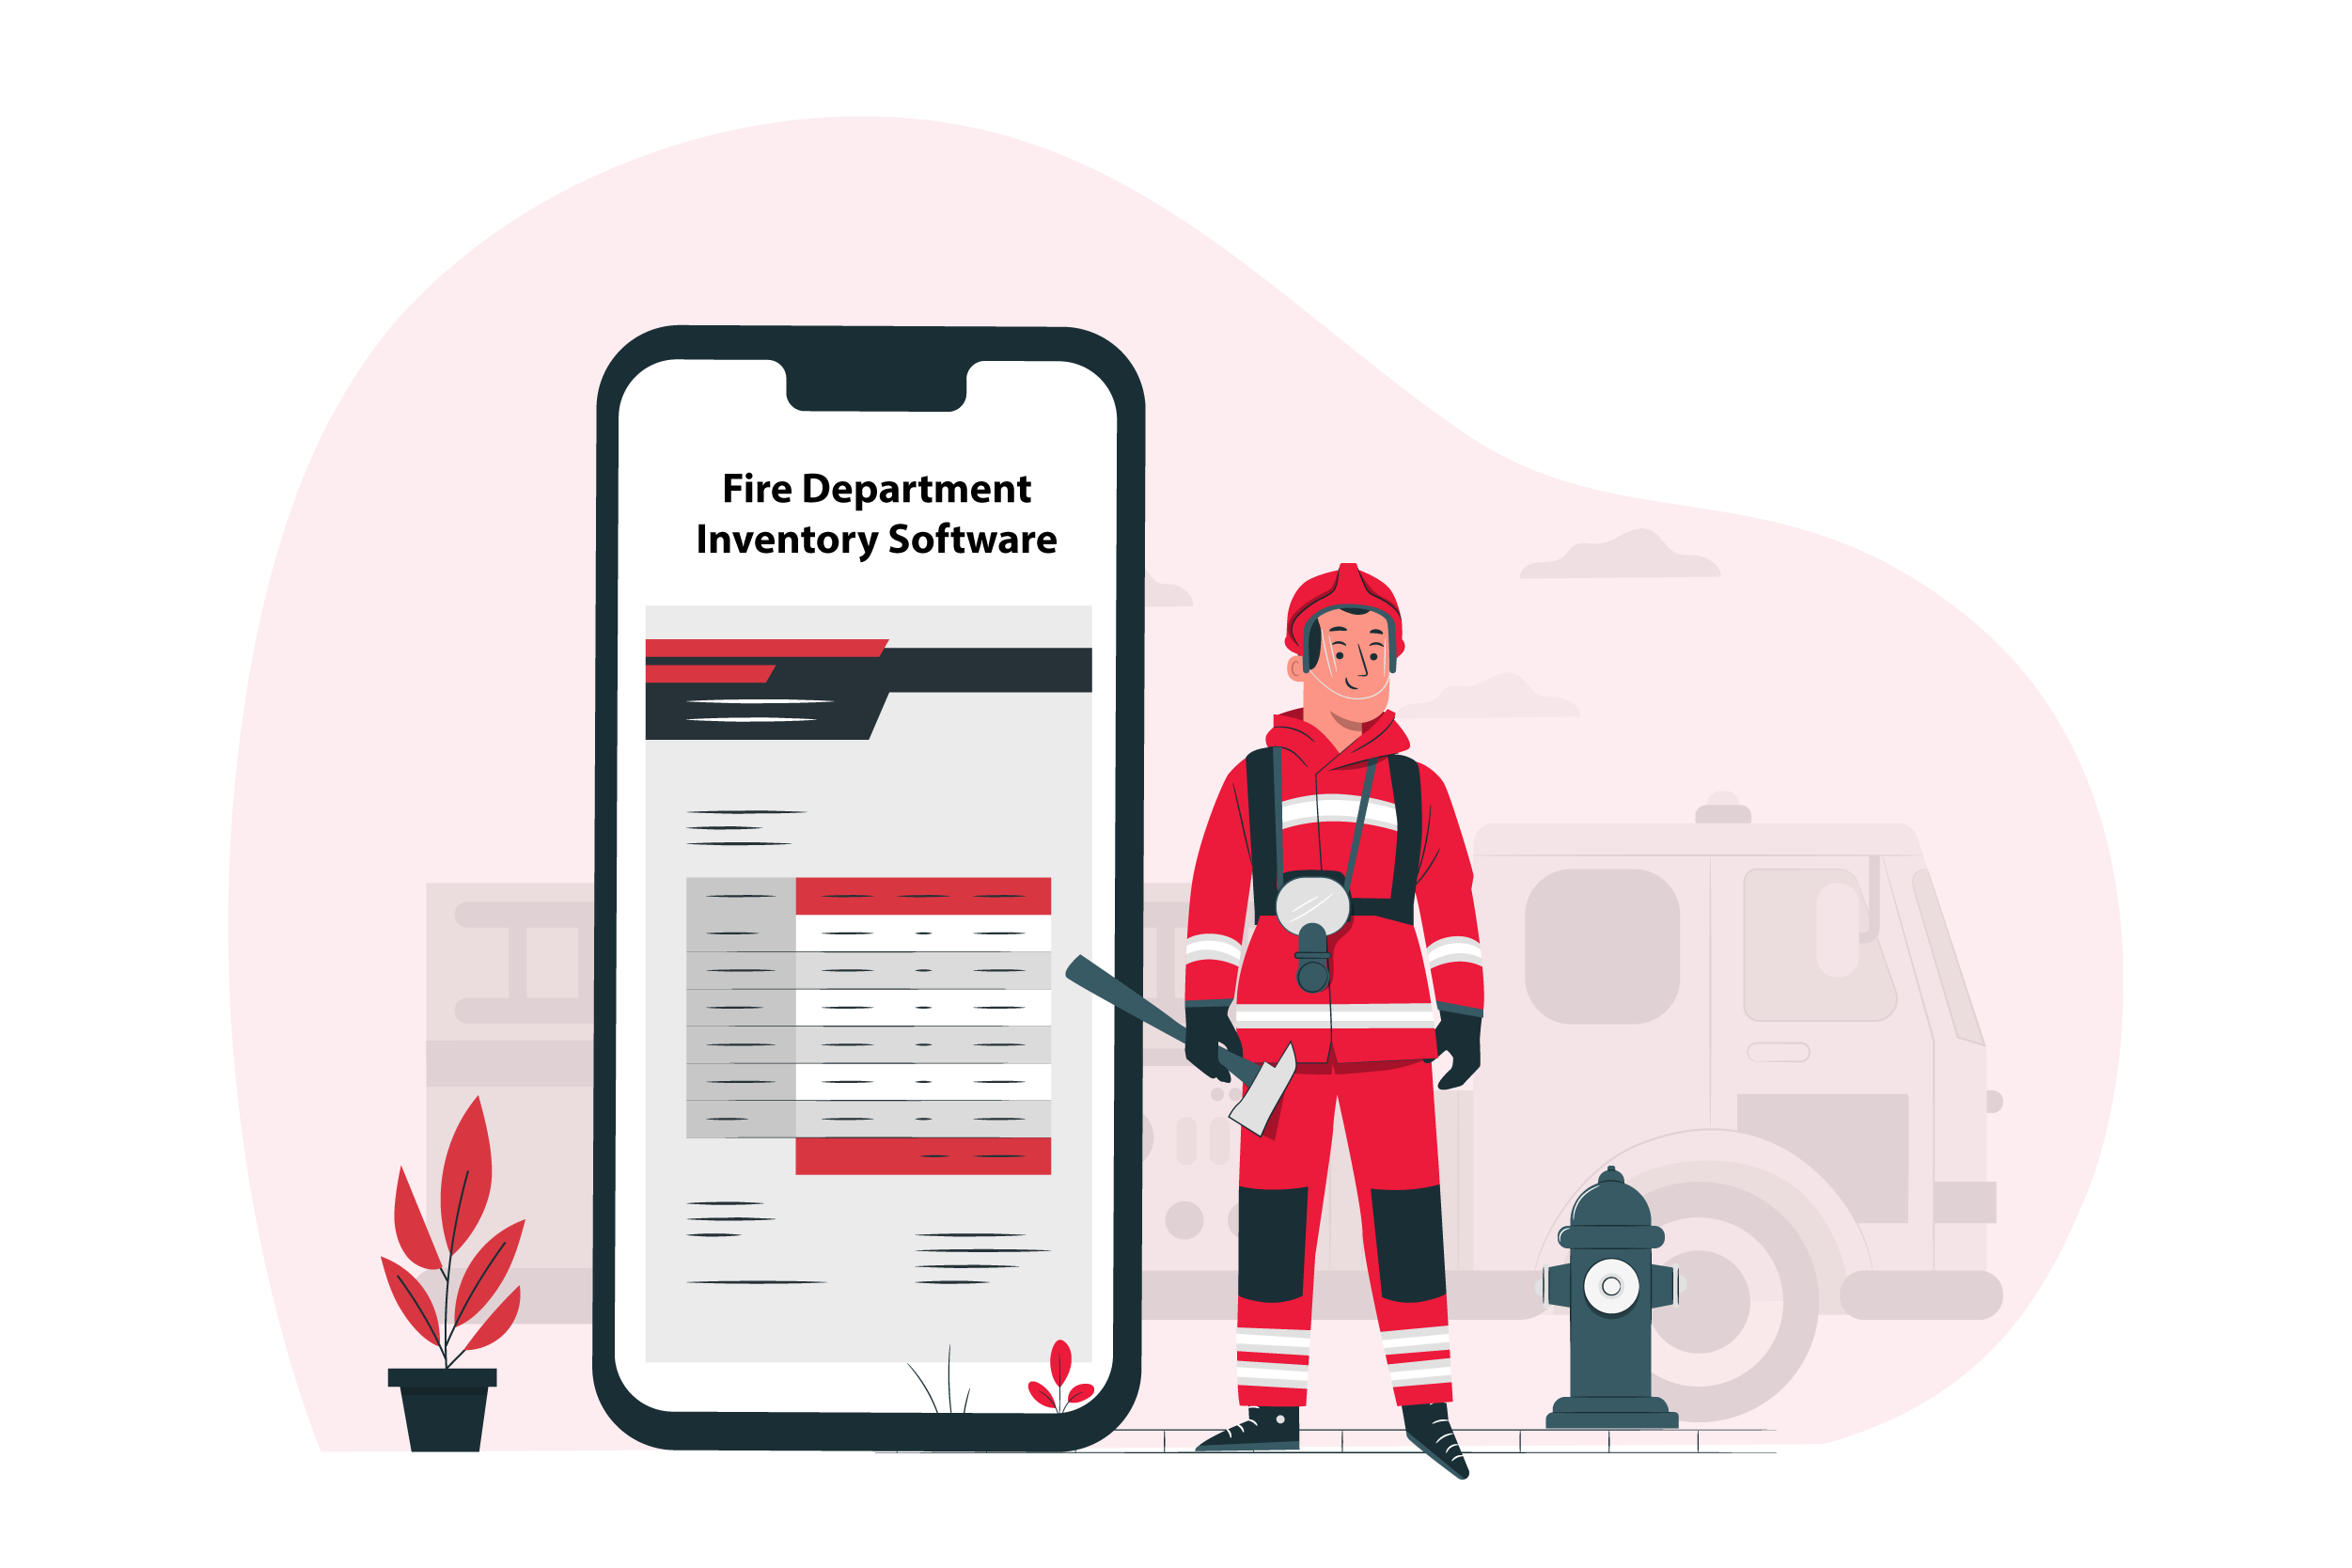 Fire Department Inventory Software